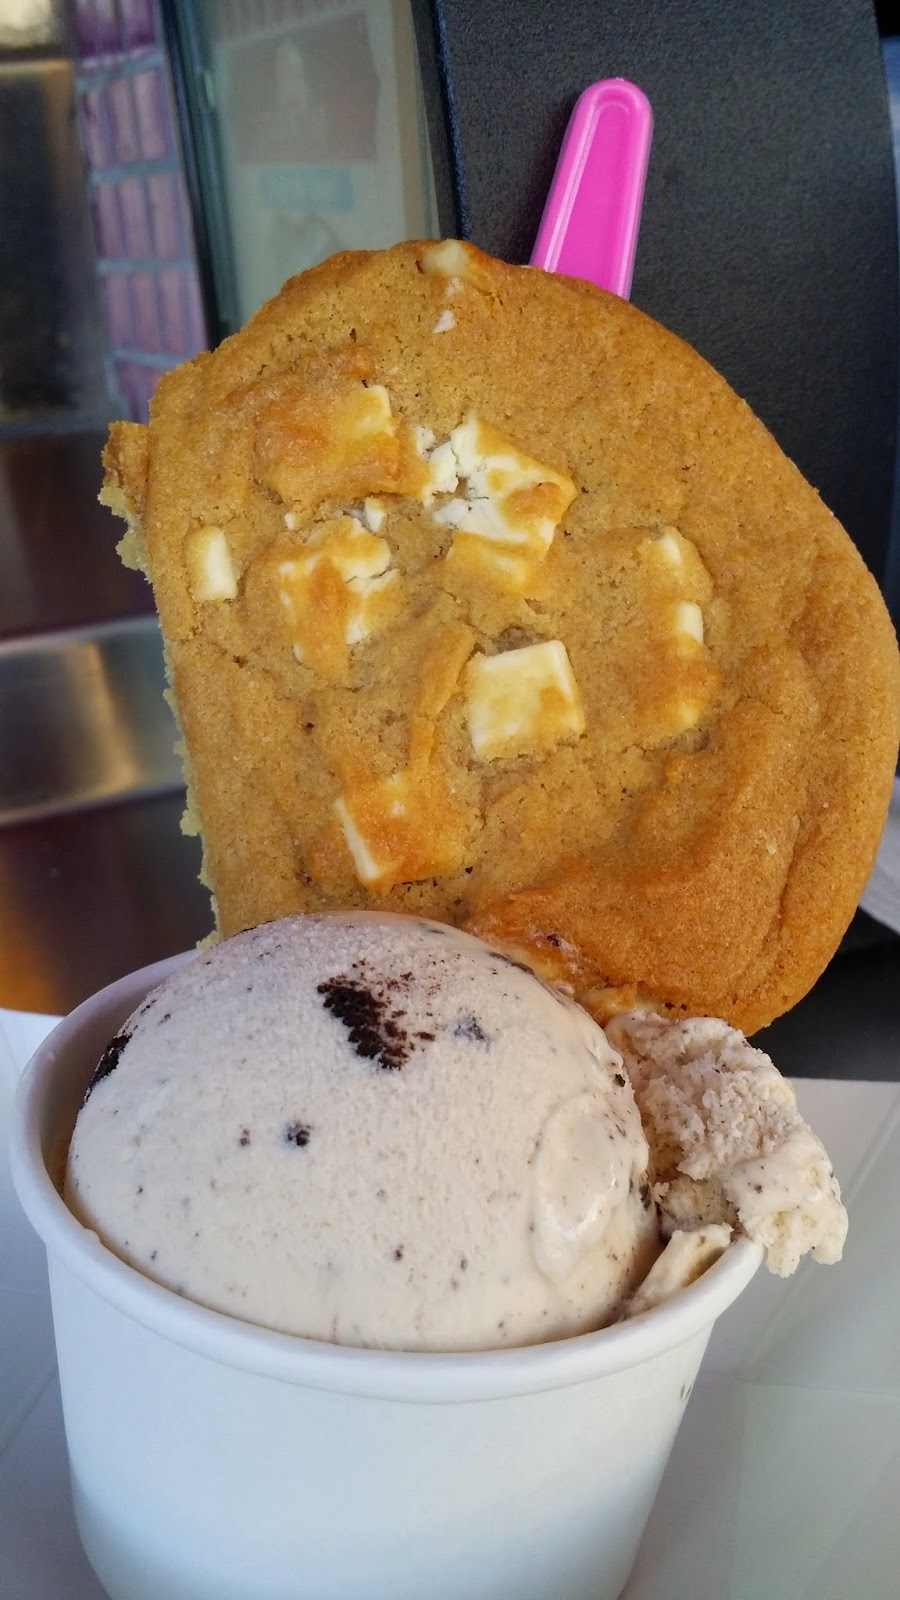 thrifty ice cream Archives - Tucson Foodie